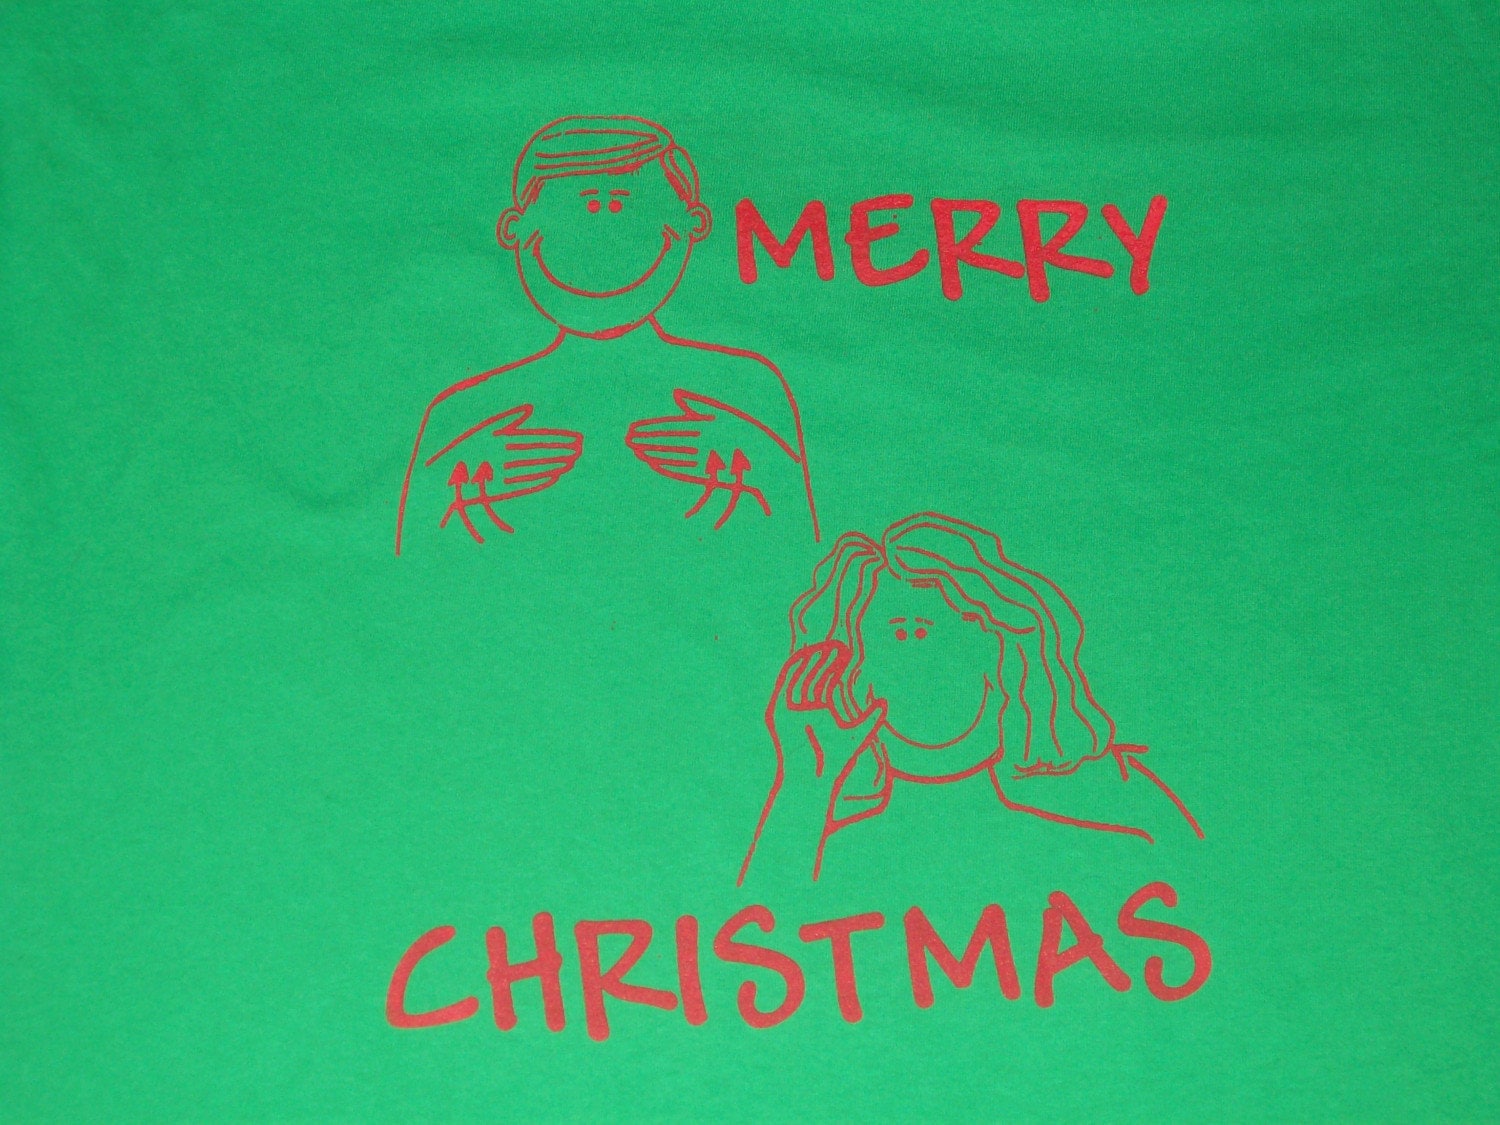 sign language Merry Christmas available in by sayitinsign on Etsy